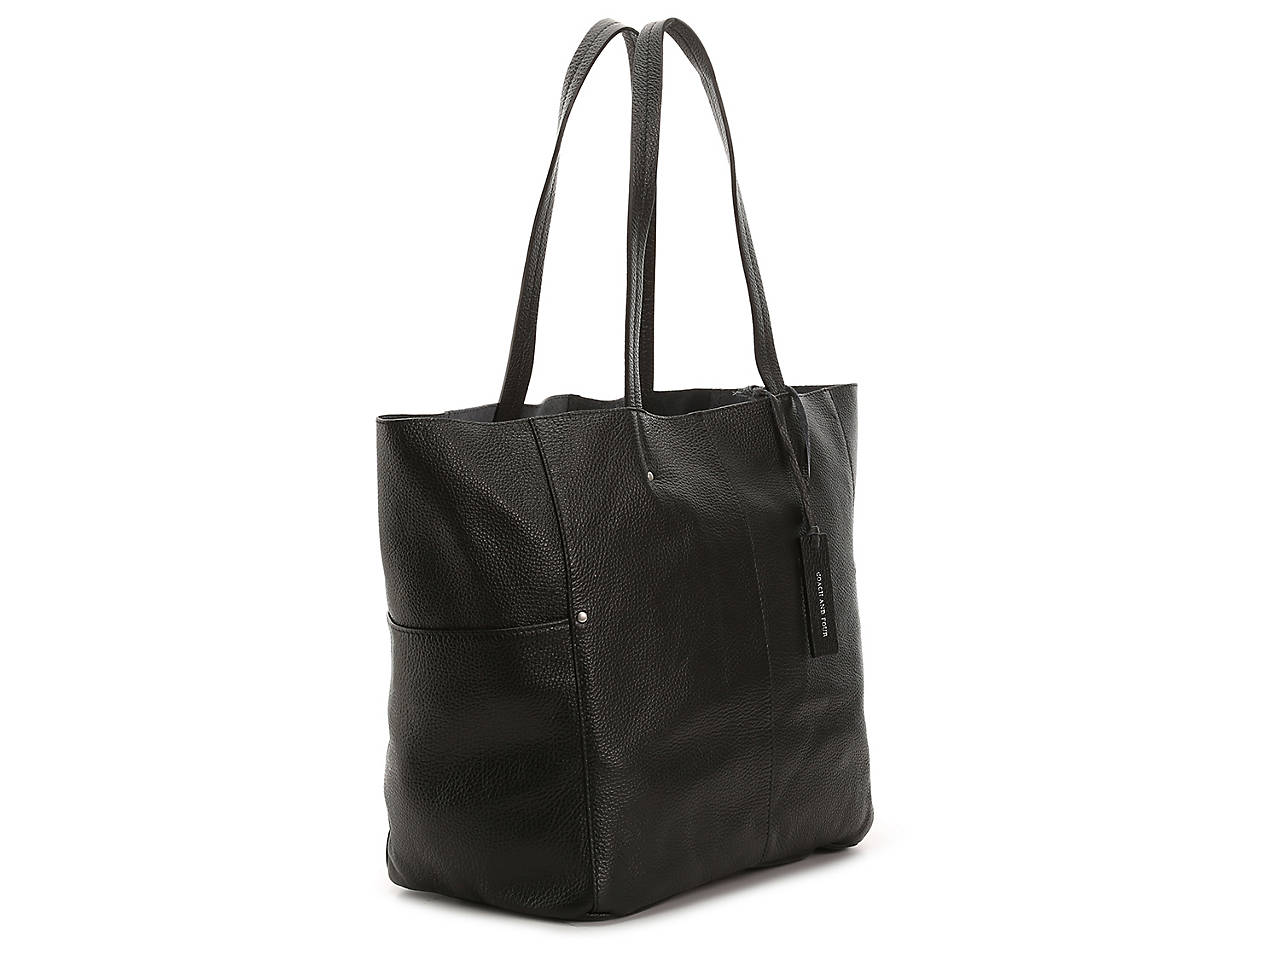 Coach and Four Unlined Leather Tote Women's Handbags & Accessories | DSW